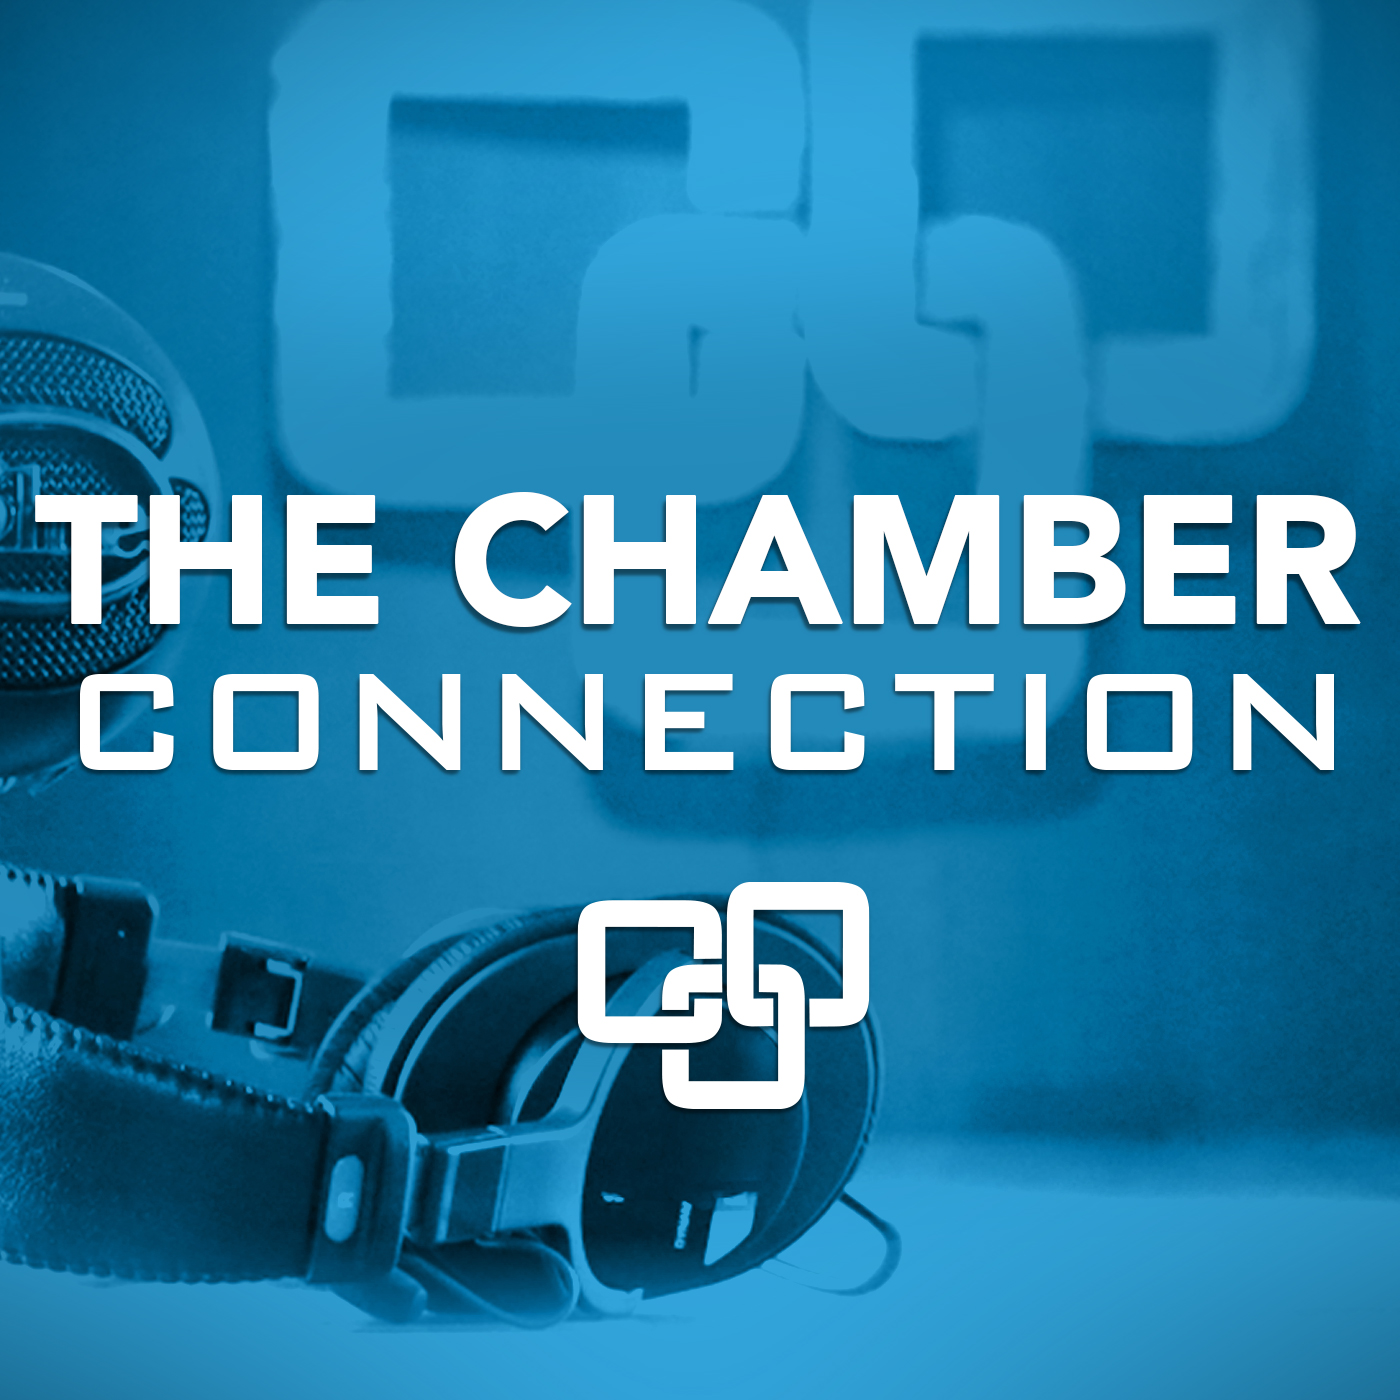 “The Chamber Connection on Corporate Culture featuring Kurtis Karn, WEX Health